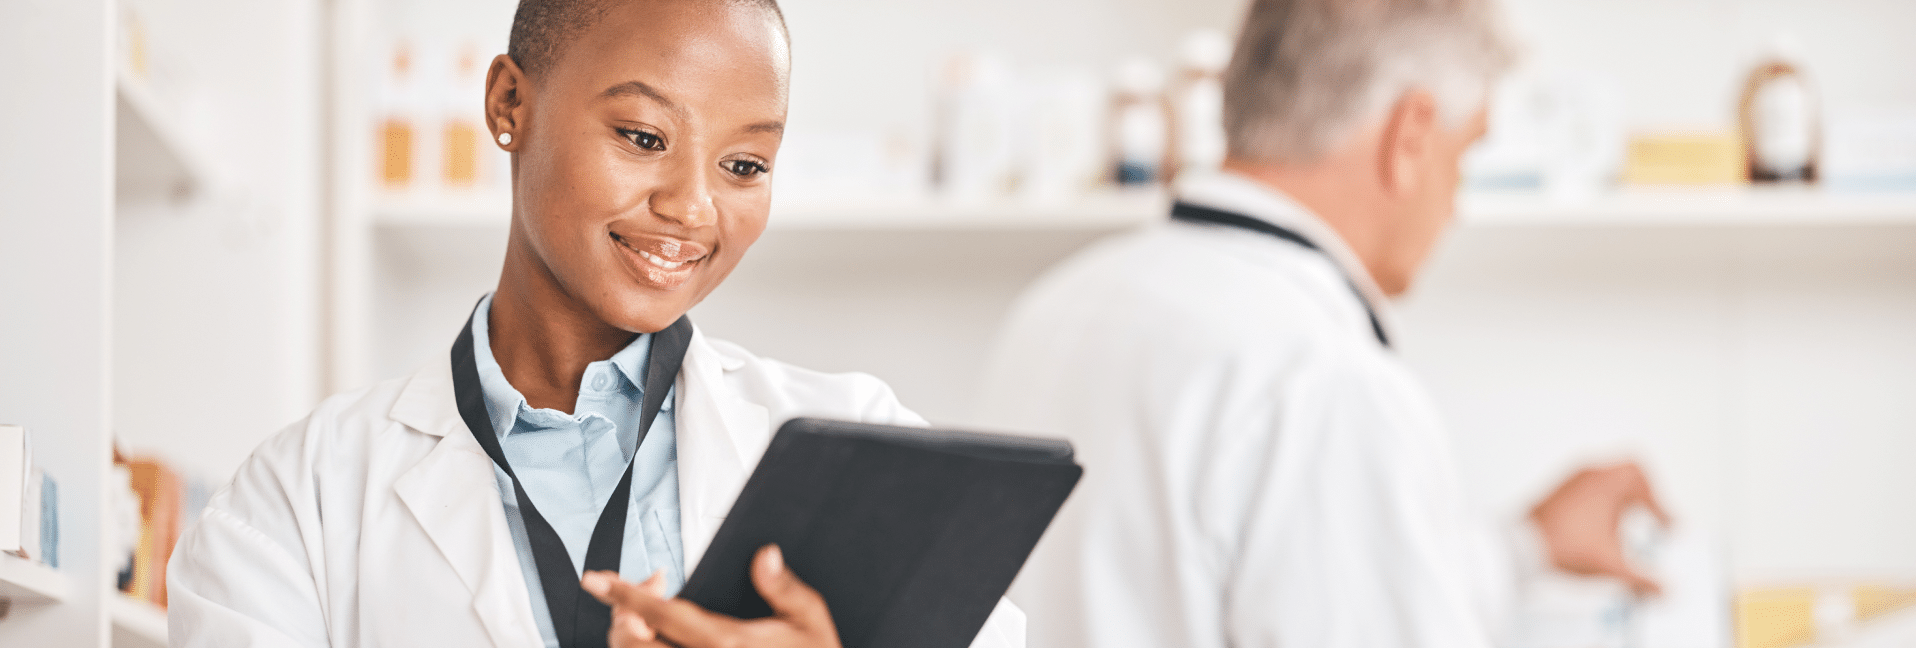 A Guide to Pharmacy Specializations and Career Paths